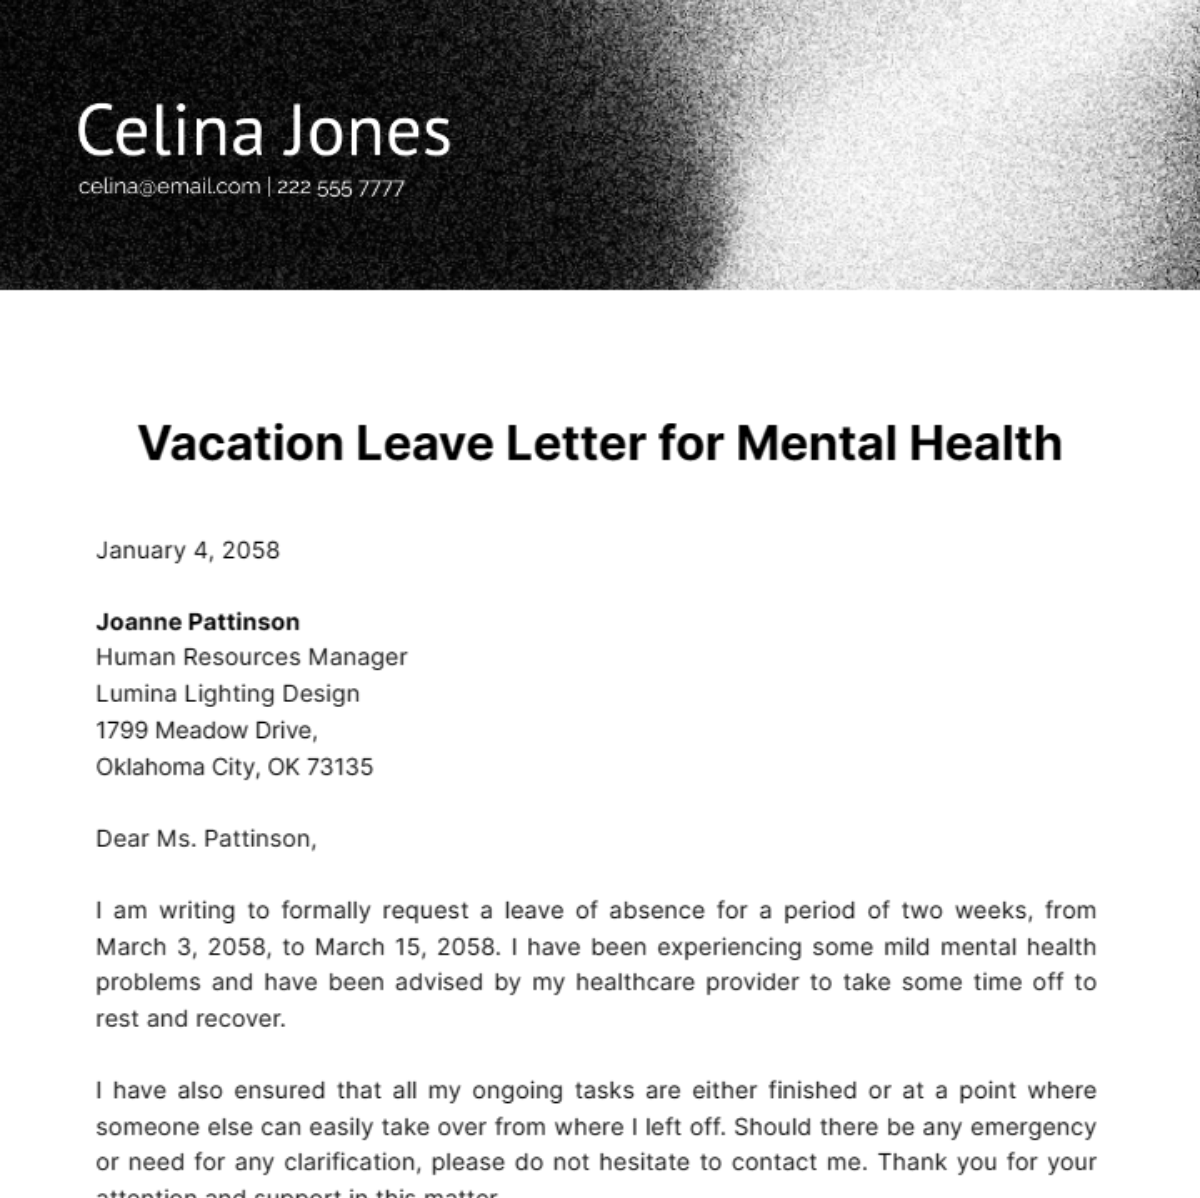 Vacation Leave Letter for Mental Health Template